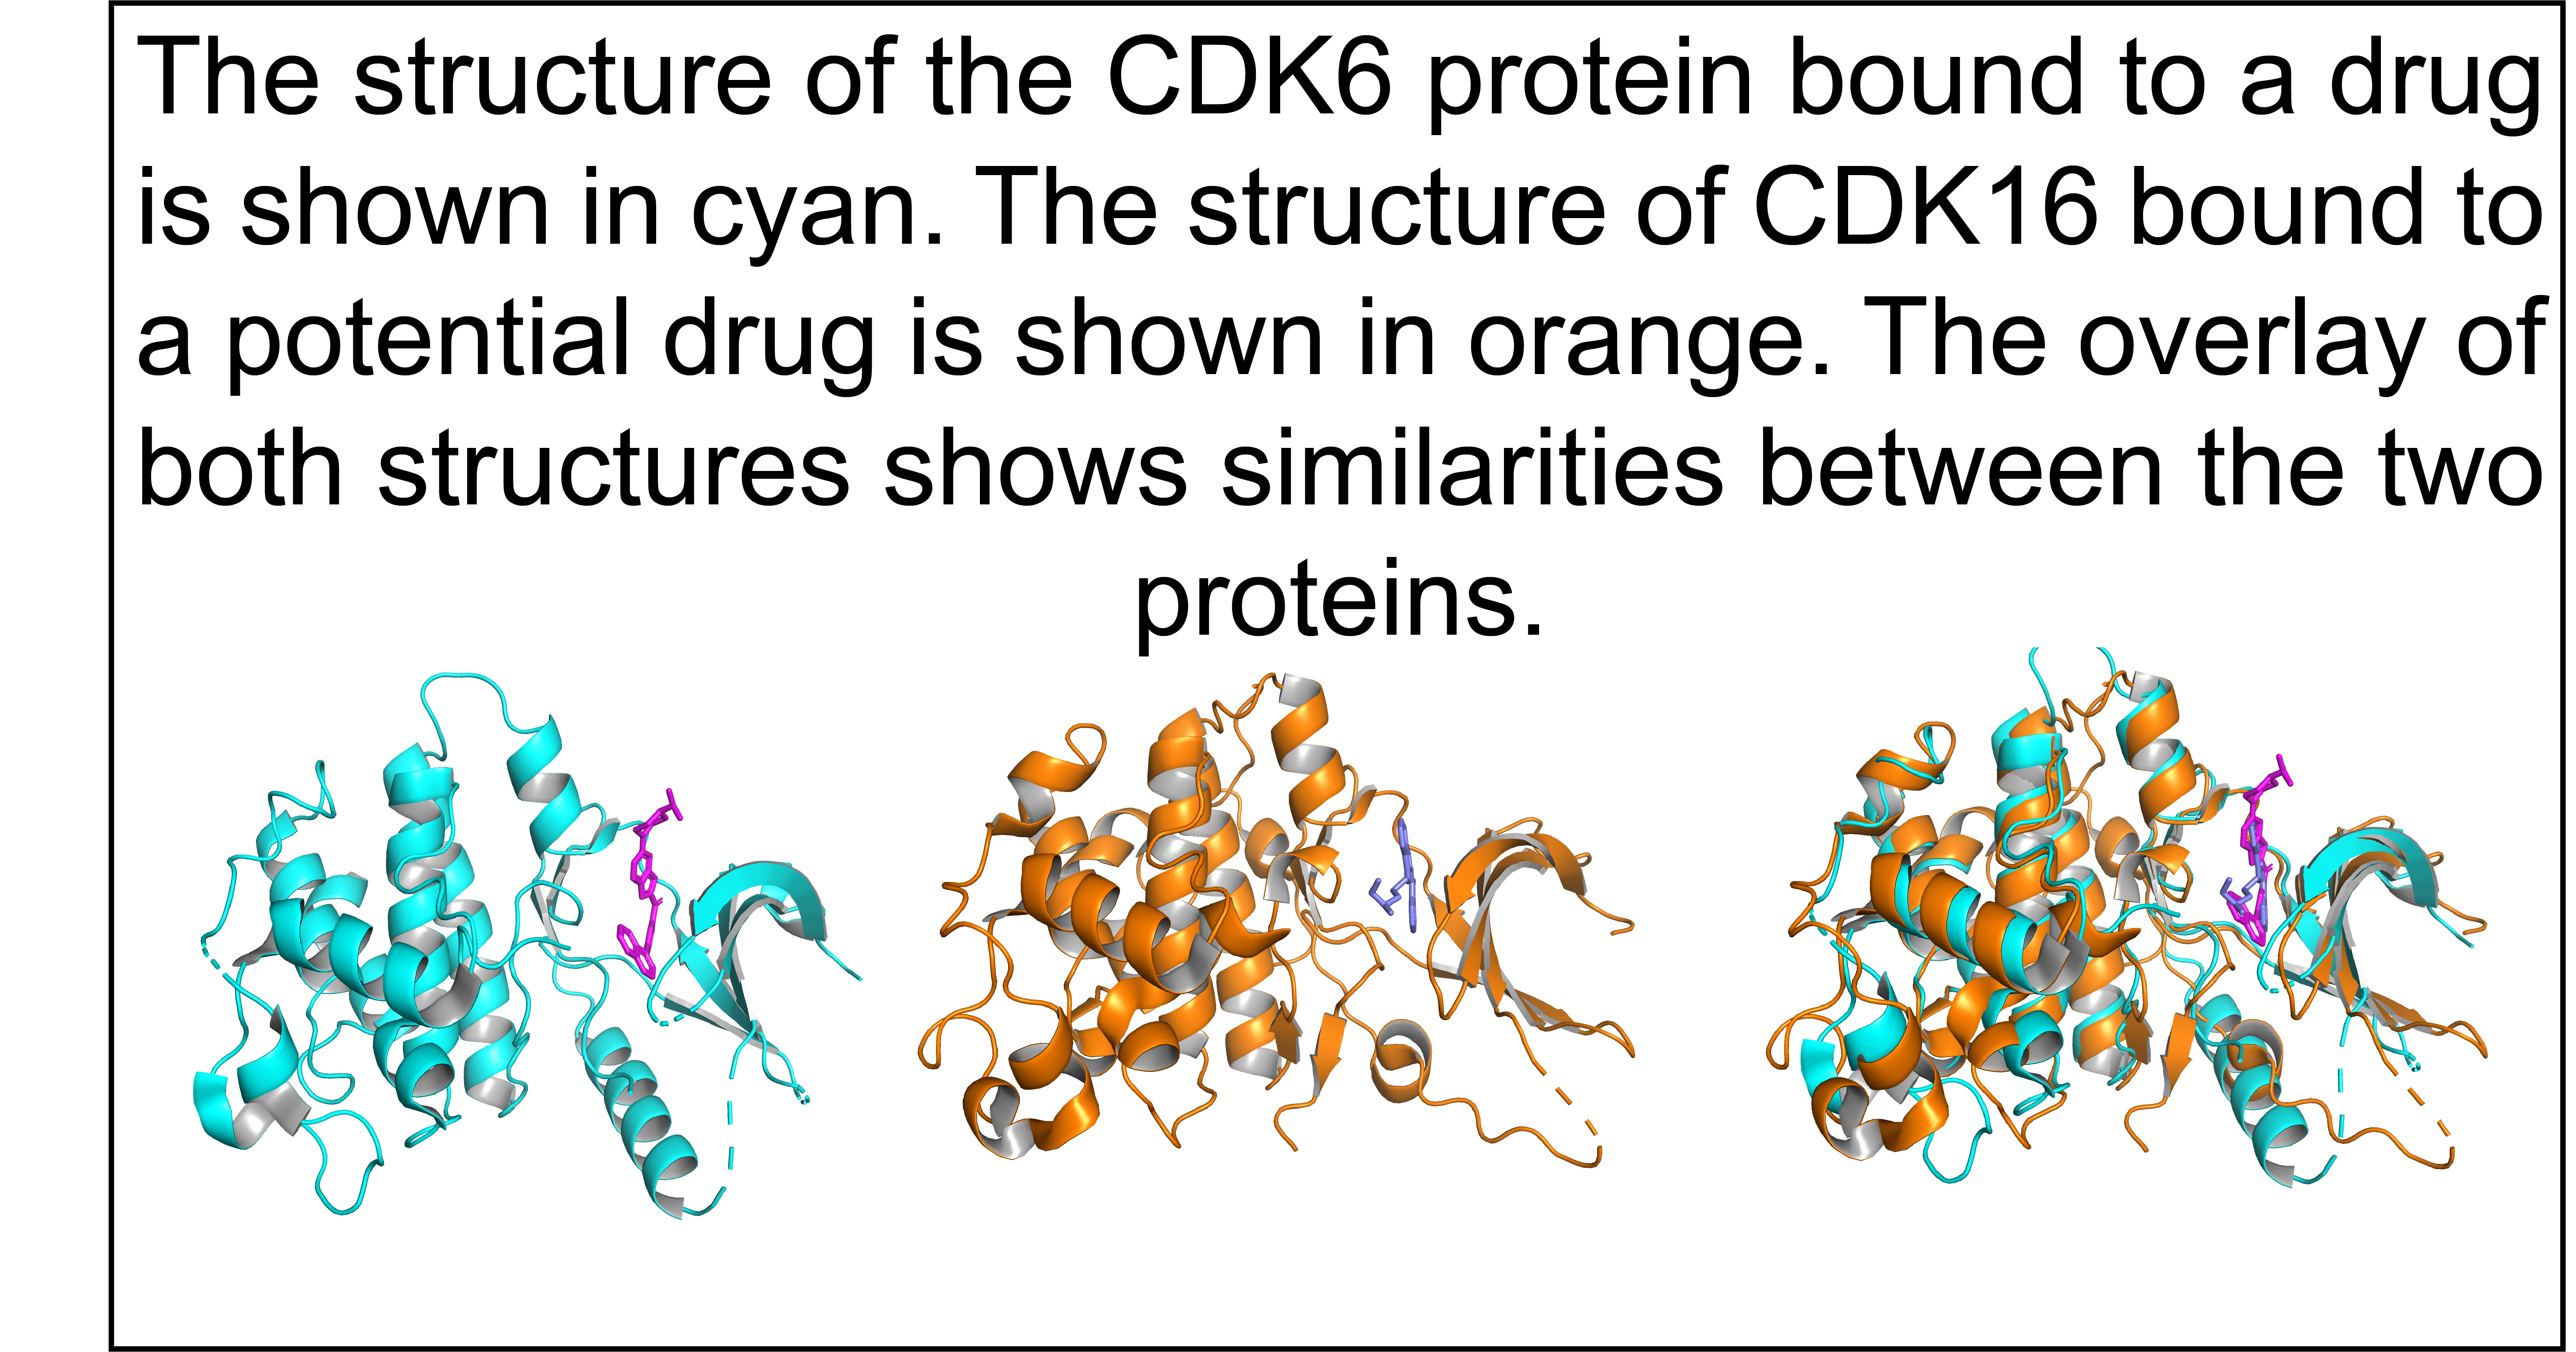 Image of two proteins bound to drugs. A third panel shows an overlay of both protein structures. This is to show how the IDG program can use information from previous studies to better our understanding of understudied protein function